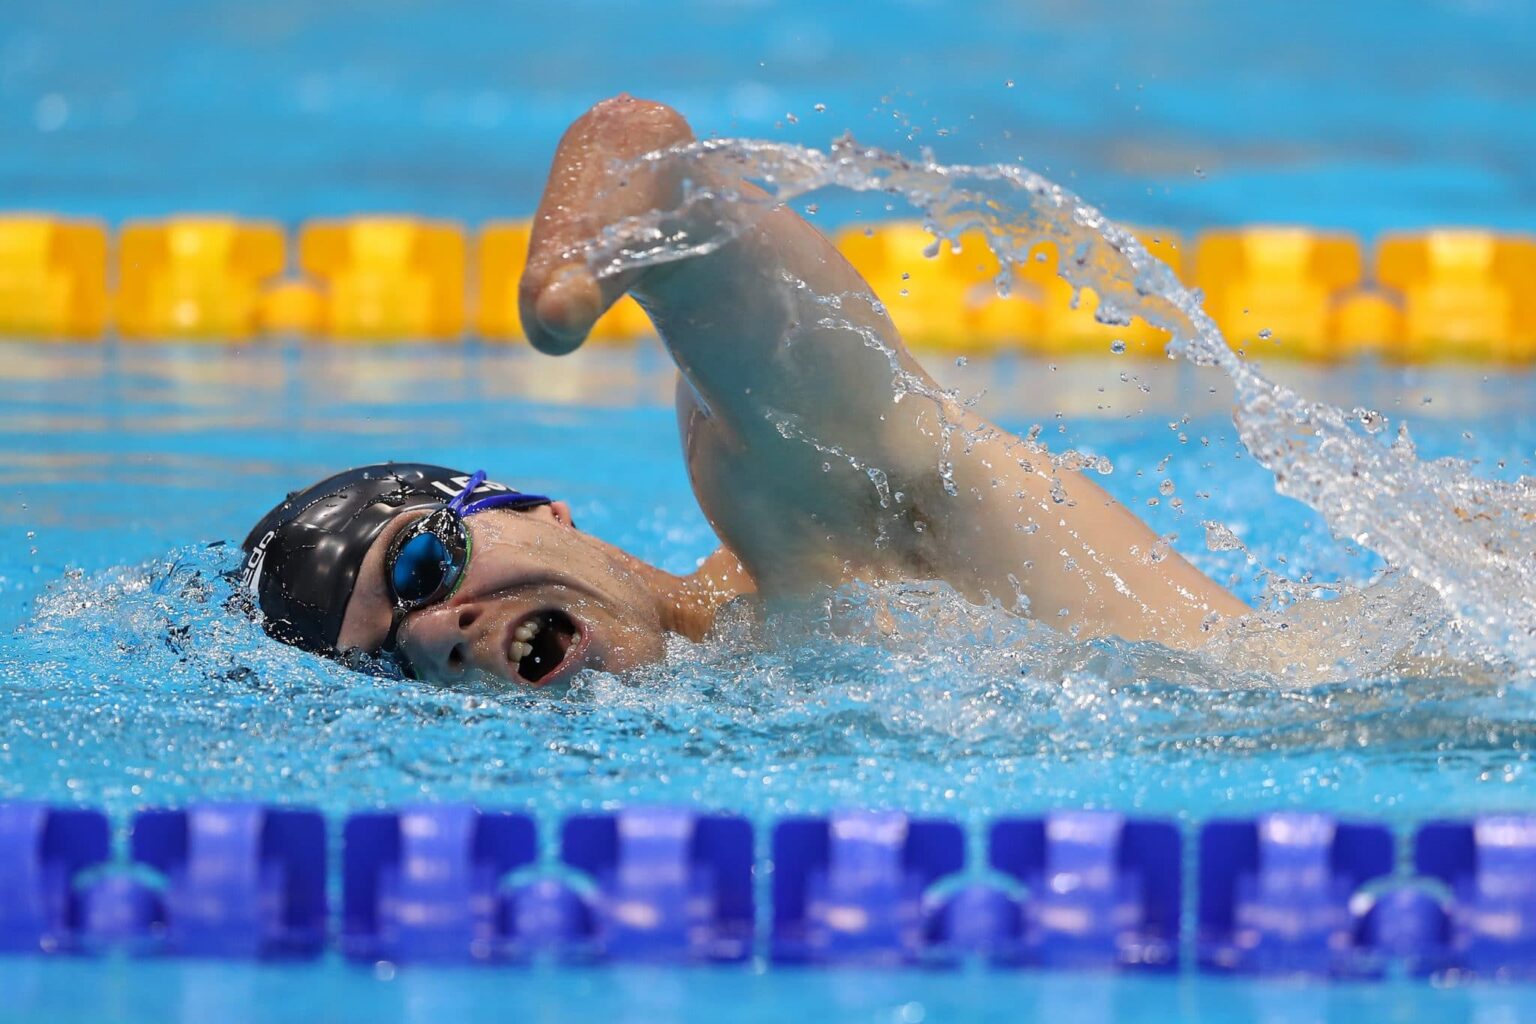 Cameron Leslie of New Zealand competes in the Men's 200m freestyle S4 heats during Day Six of the London 2019 World Para-swimming Allianz Championships at the London Aquatics Centre